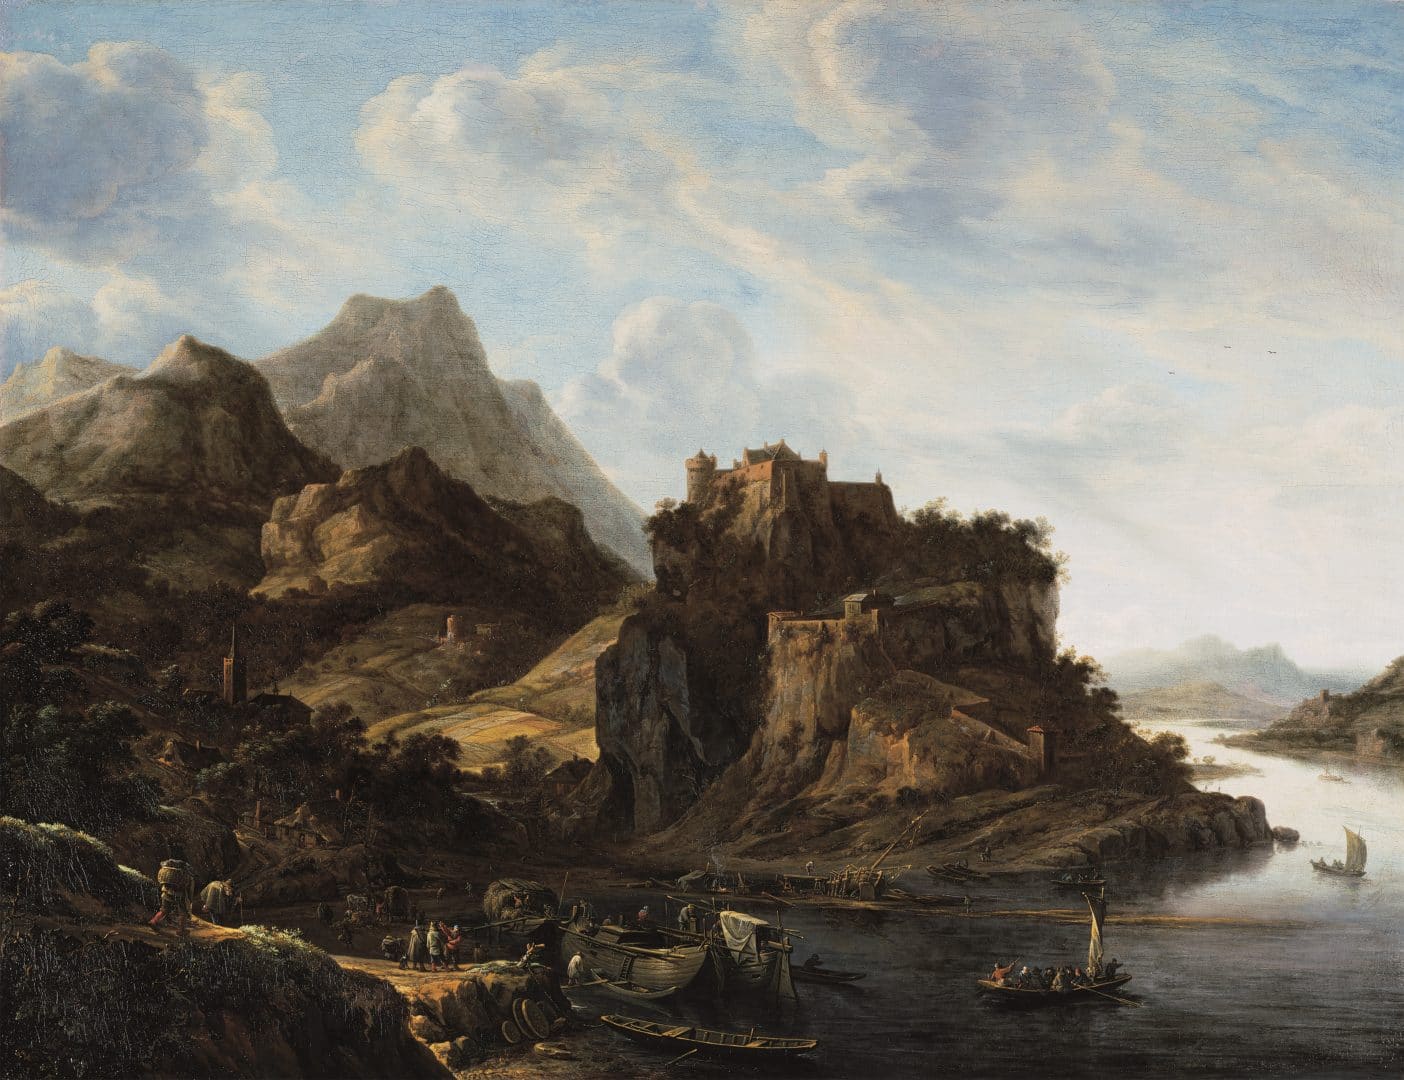 Herman Saftleven, Rhine landscape with many boats, 1649.